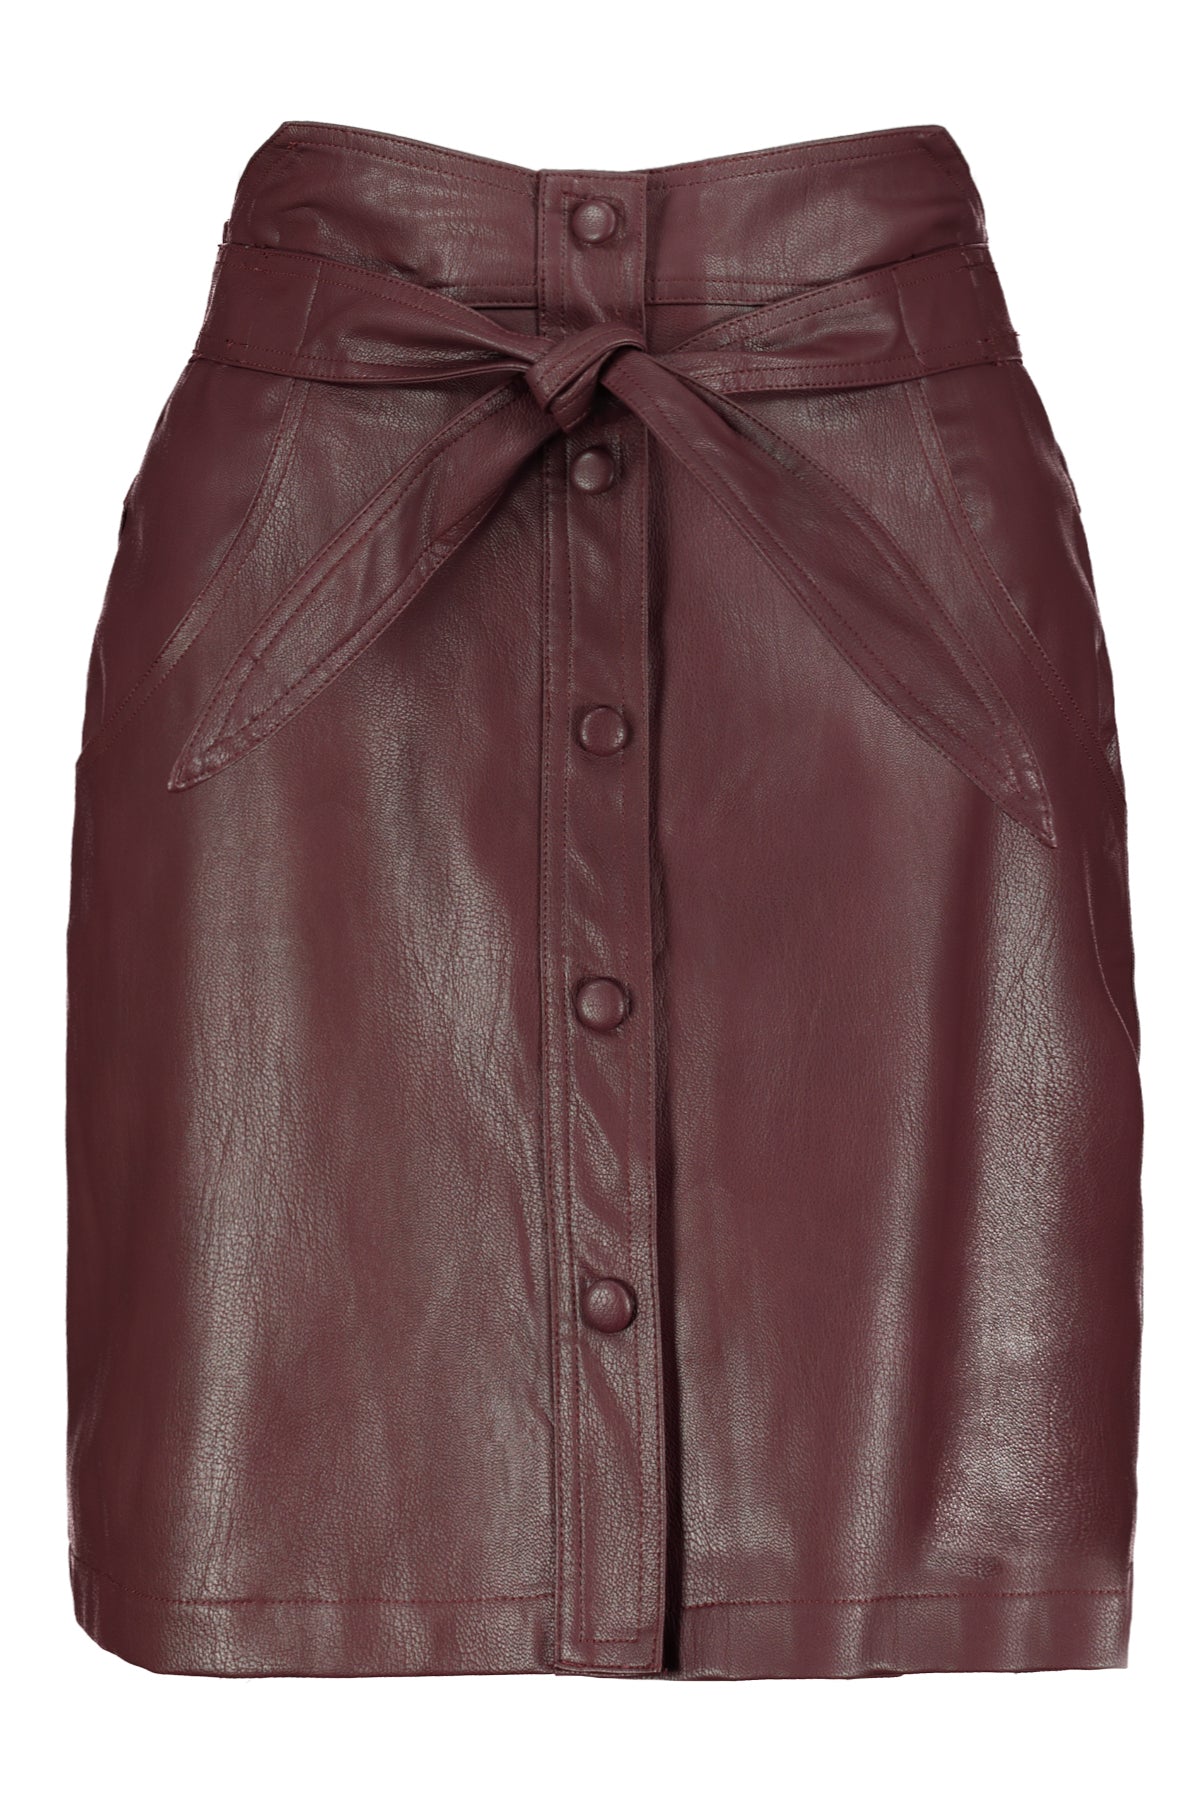 Bishop + Young Vegan Leather Button Front Skirt